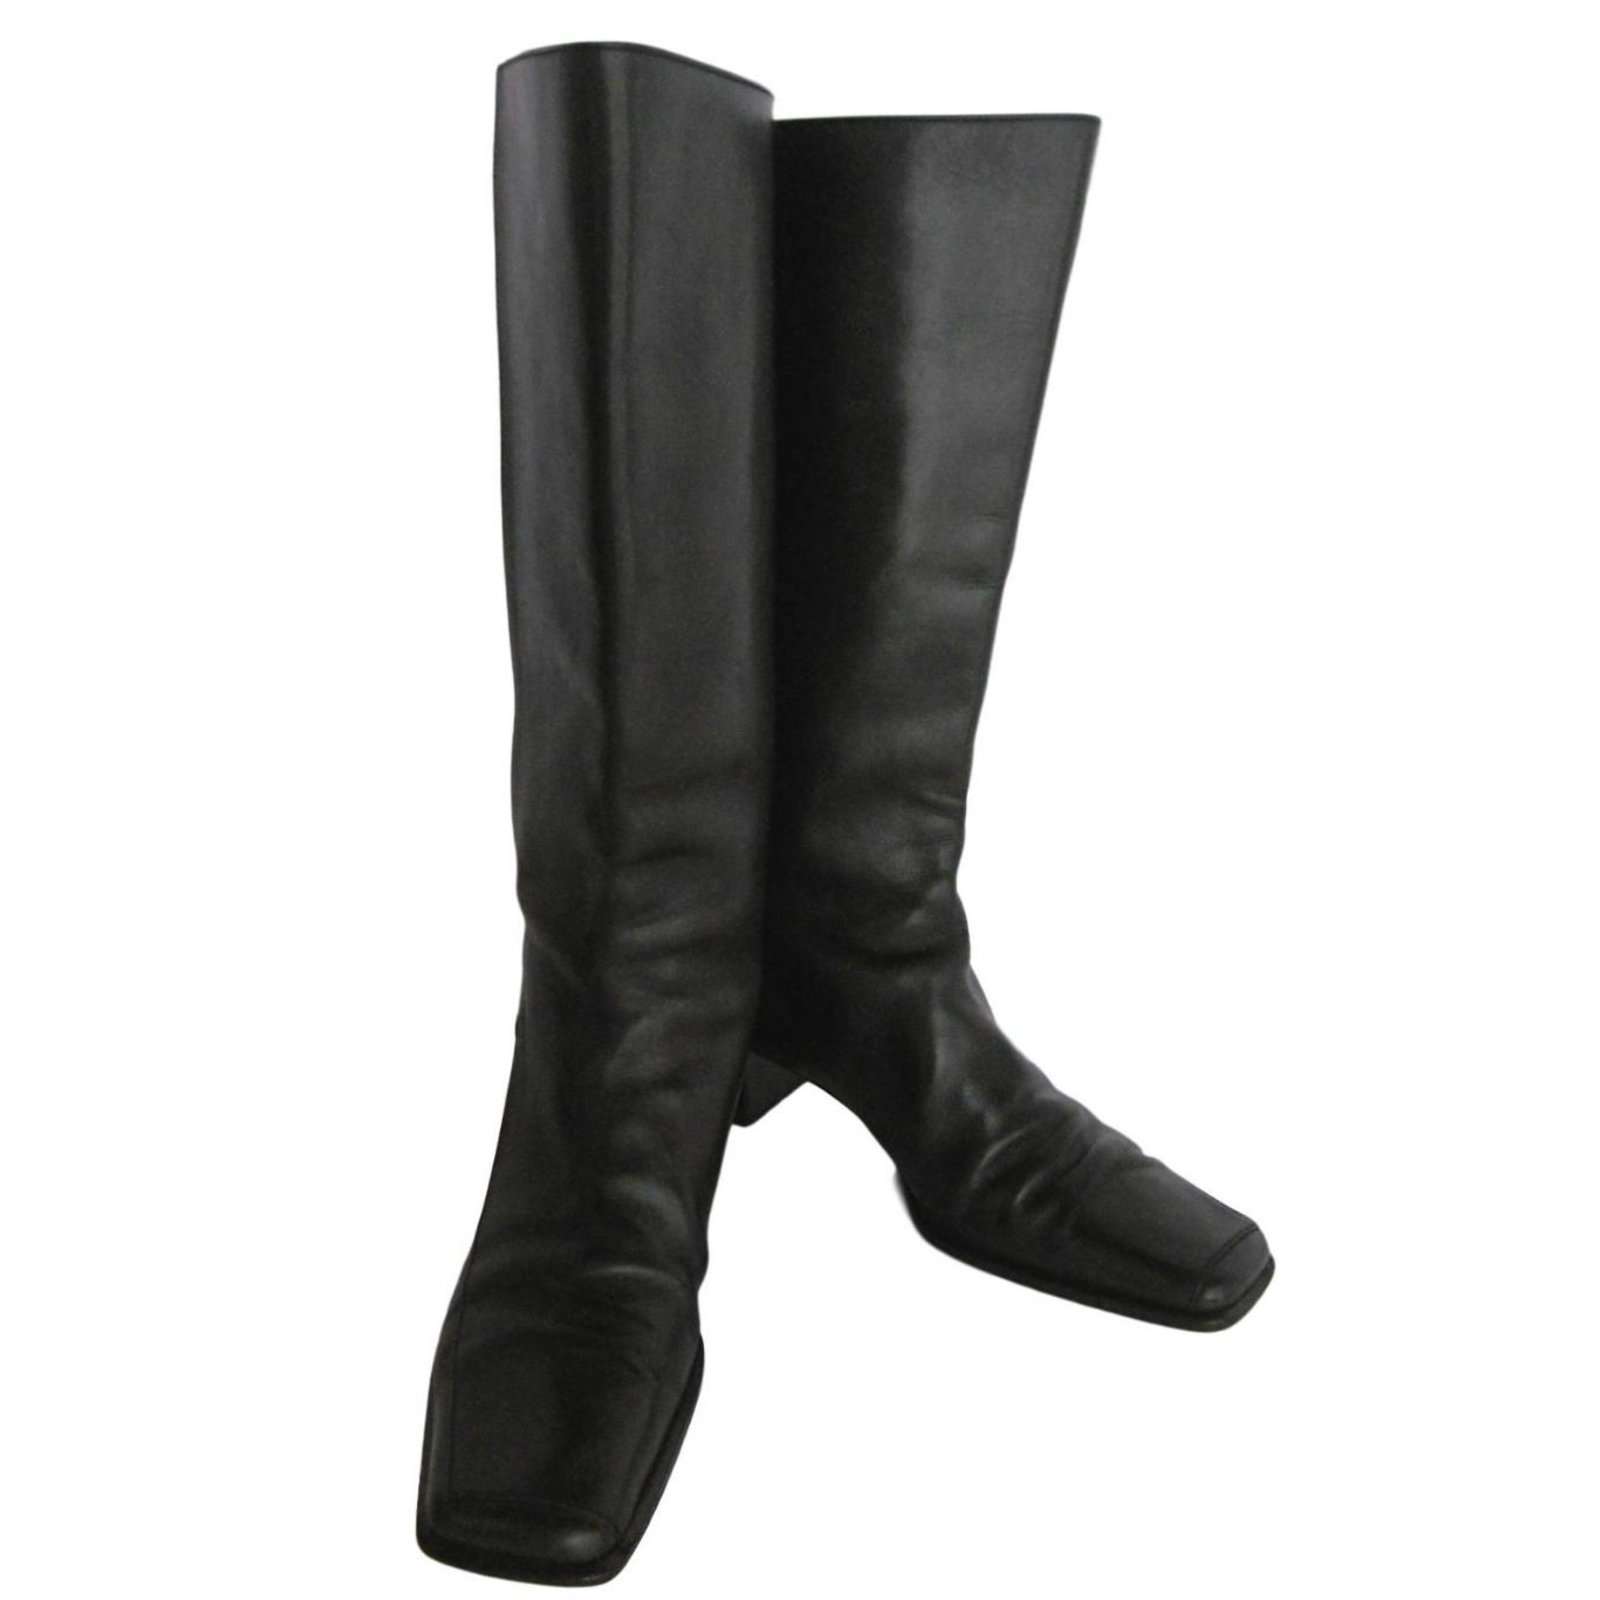 Low Heel Leather Boots Boots Leather 